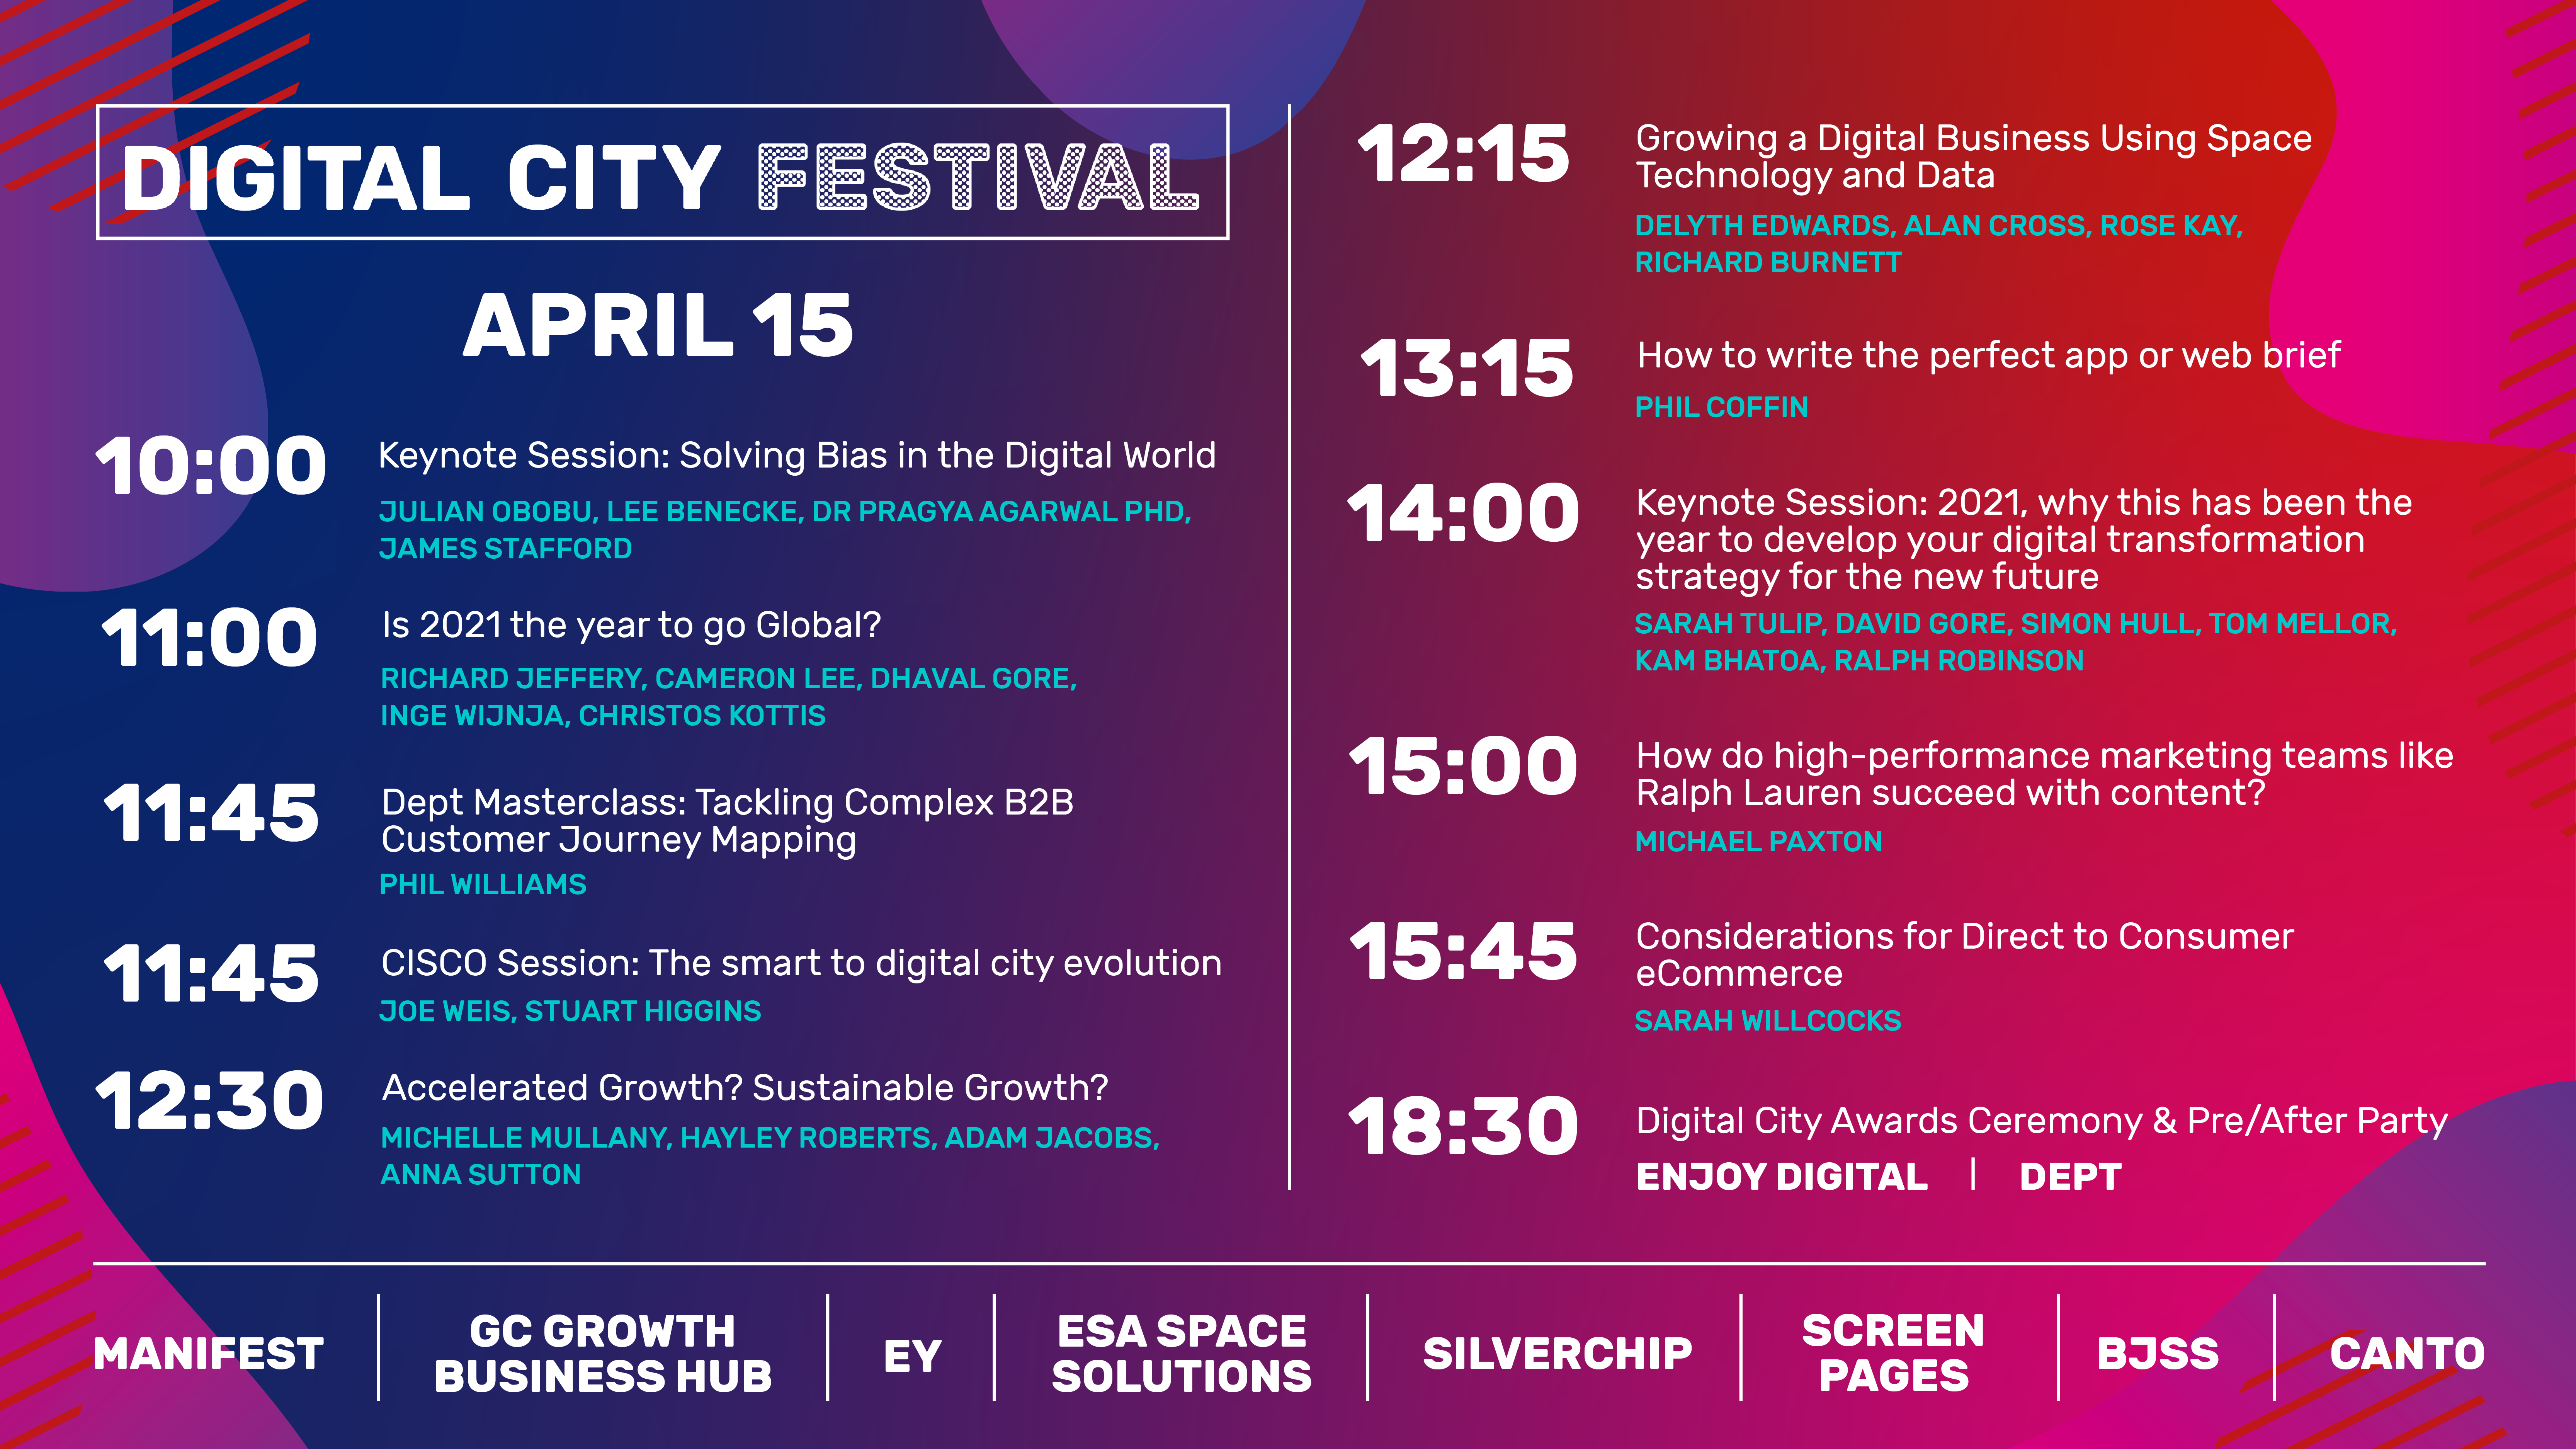 THURSDAY 15: Digital City Festival continues with talks from James Stafford of TikTok and the Department for International Trade’s Christos Kottis, plus 2021’s Digital City Awards